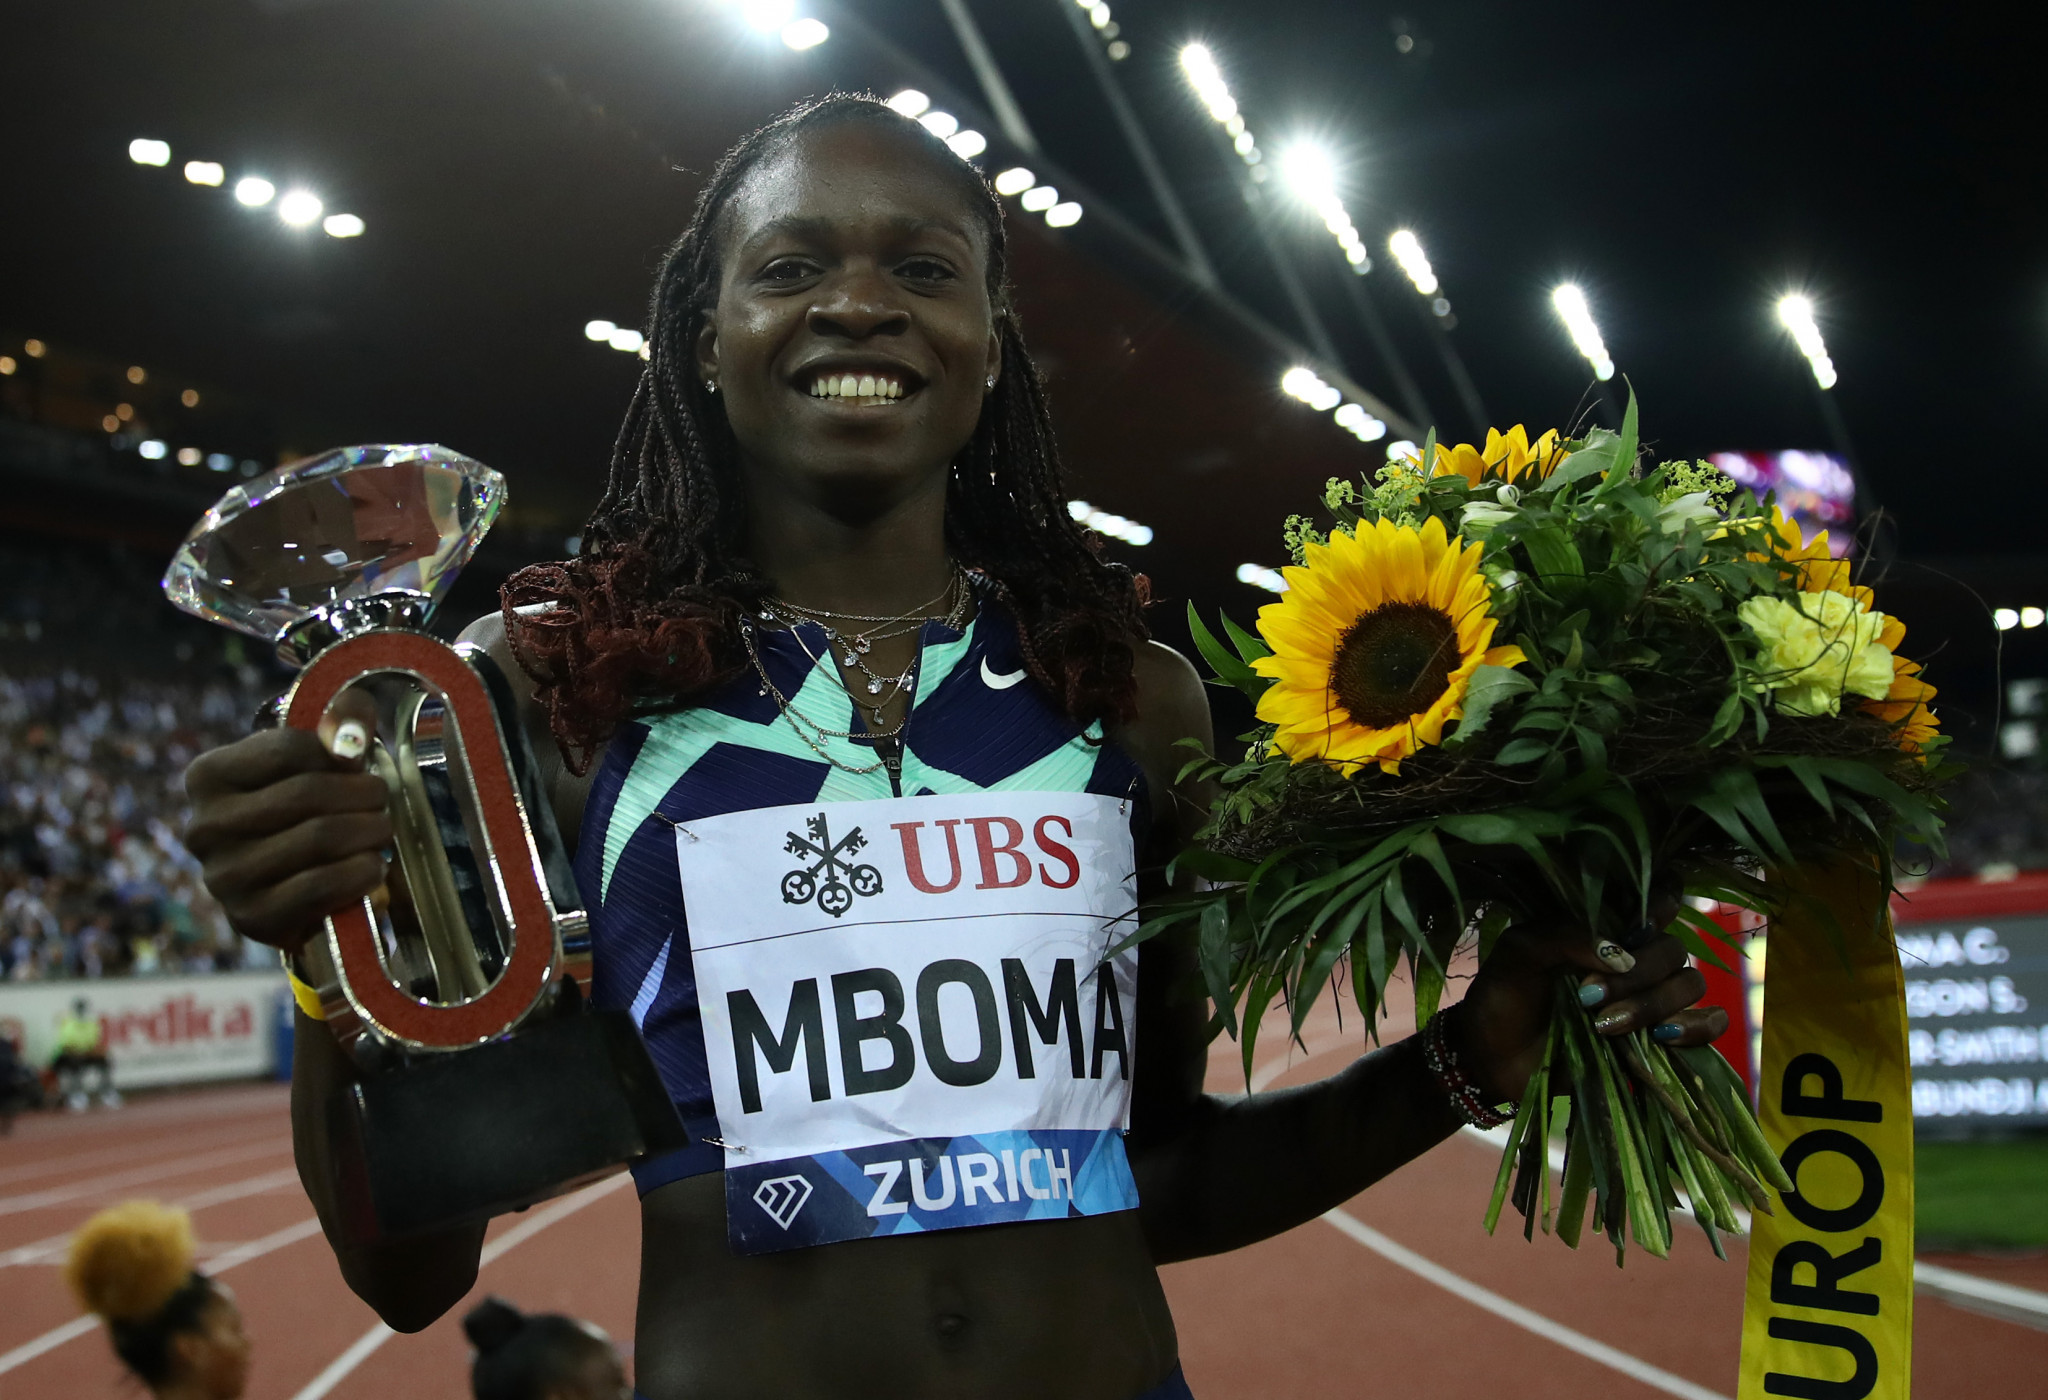 Mboma has triumphed in two Diamond League events in Brussels and Zürich and two World Athletics Continental Tour Gold events in Zagreb and Nairobi since her Tokyo 2020 silver medal ©Getty Images